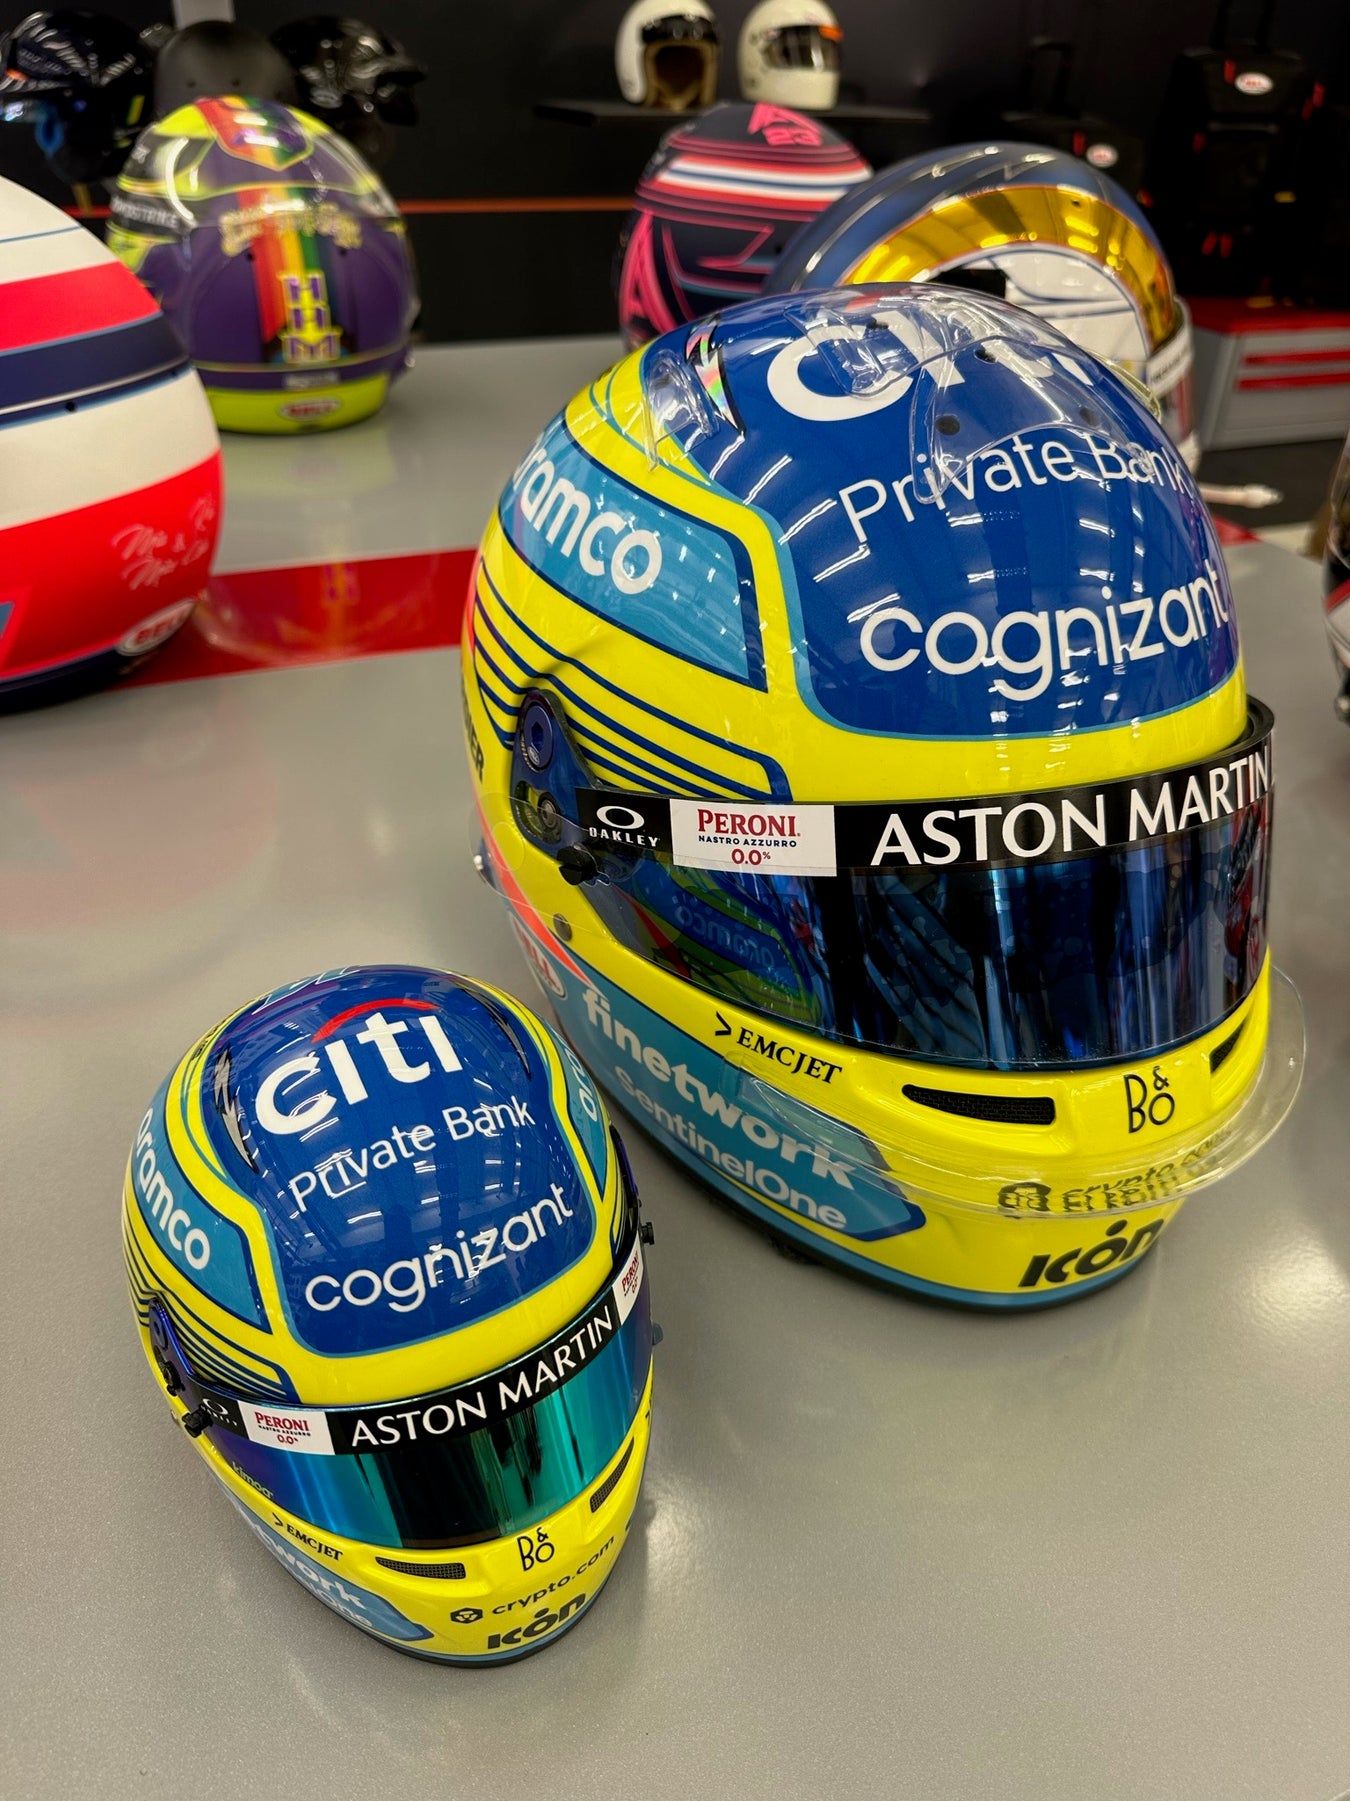 Mini Helmets From Top Motorsports Leagues as Formula 1®, Formula E®, IndyCar and More!